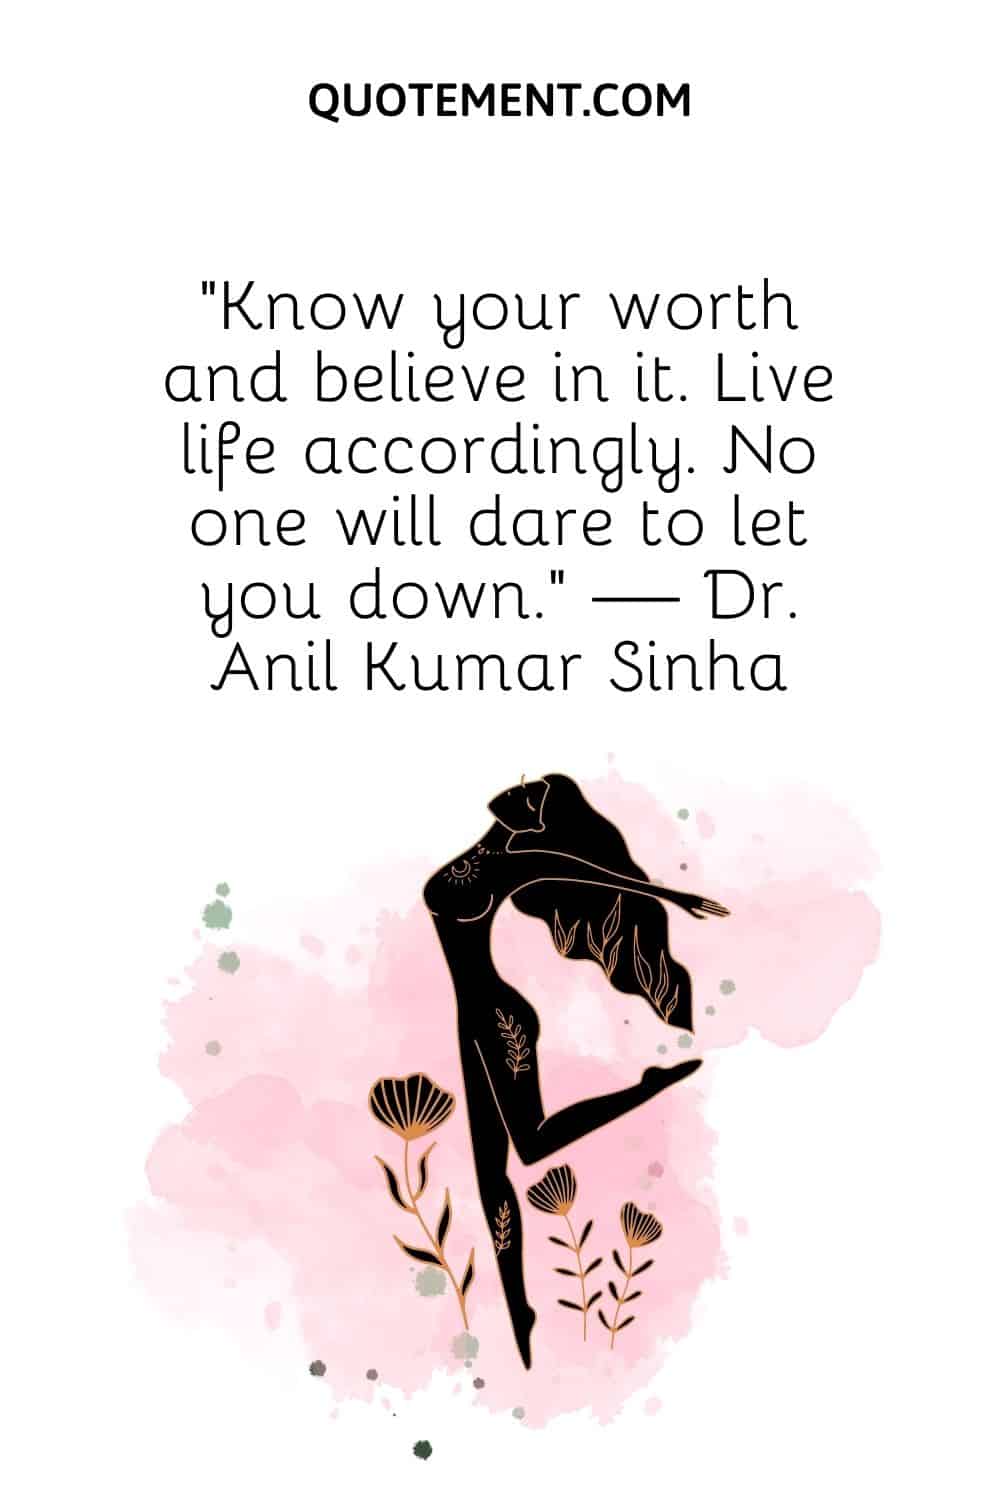 image of a dancing woman representing knowing your worth quote